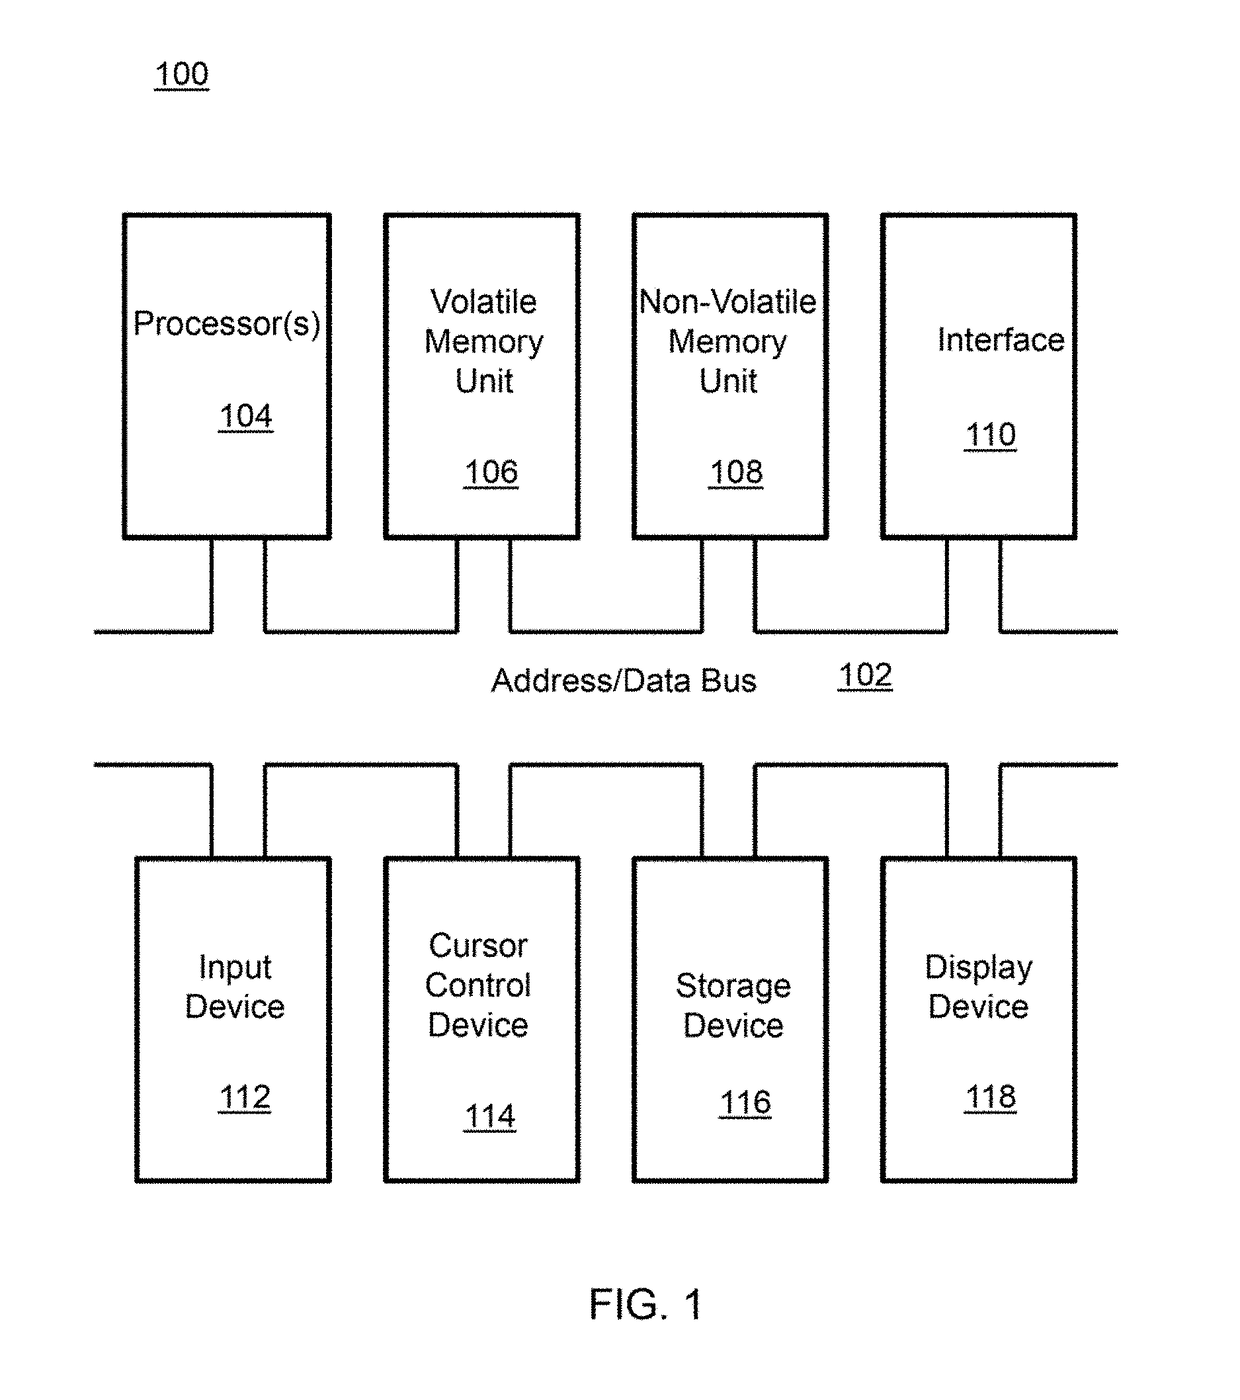 System and method for robot supervisory control with an augmented reality user interface